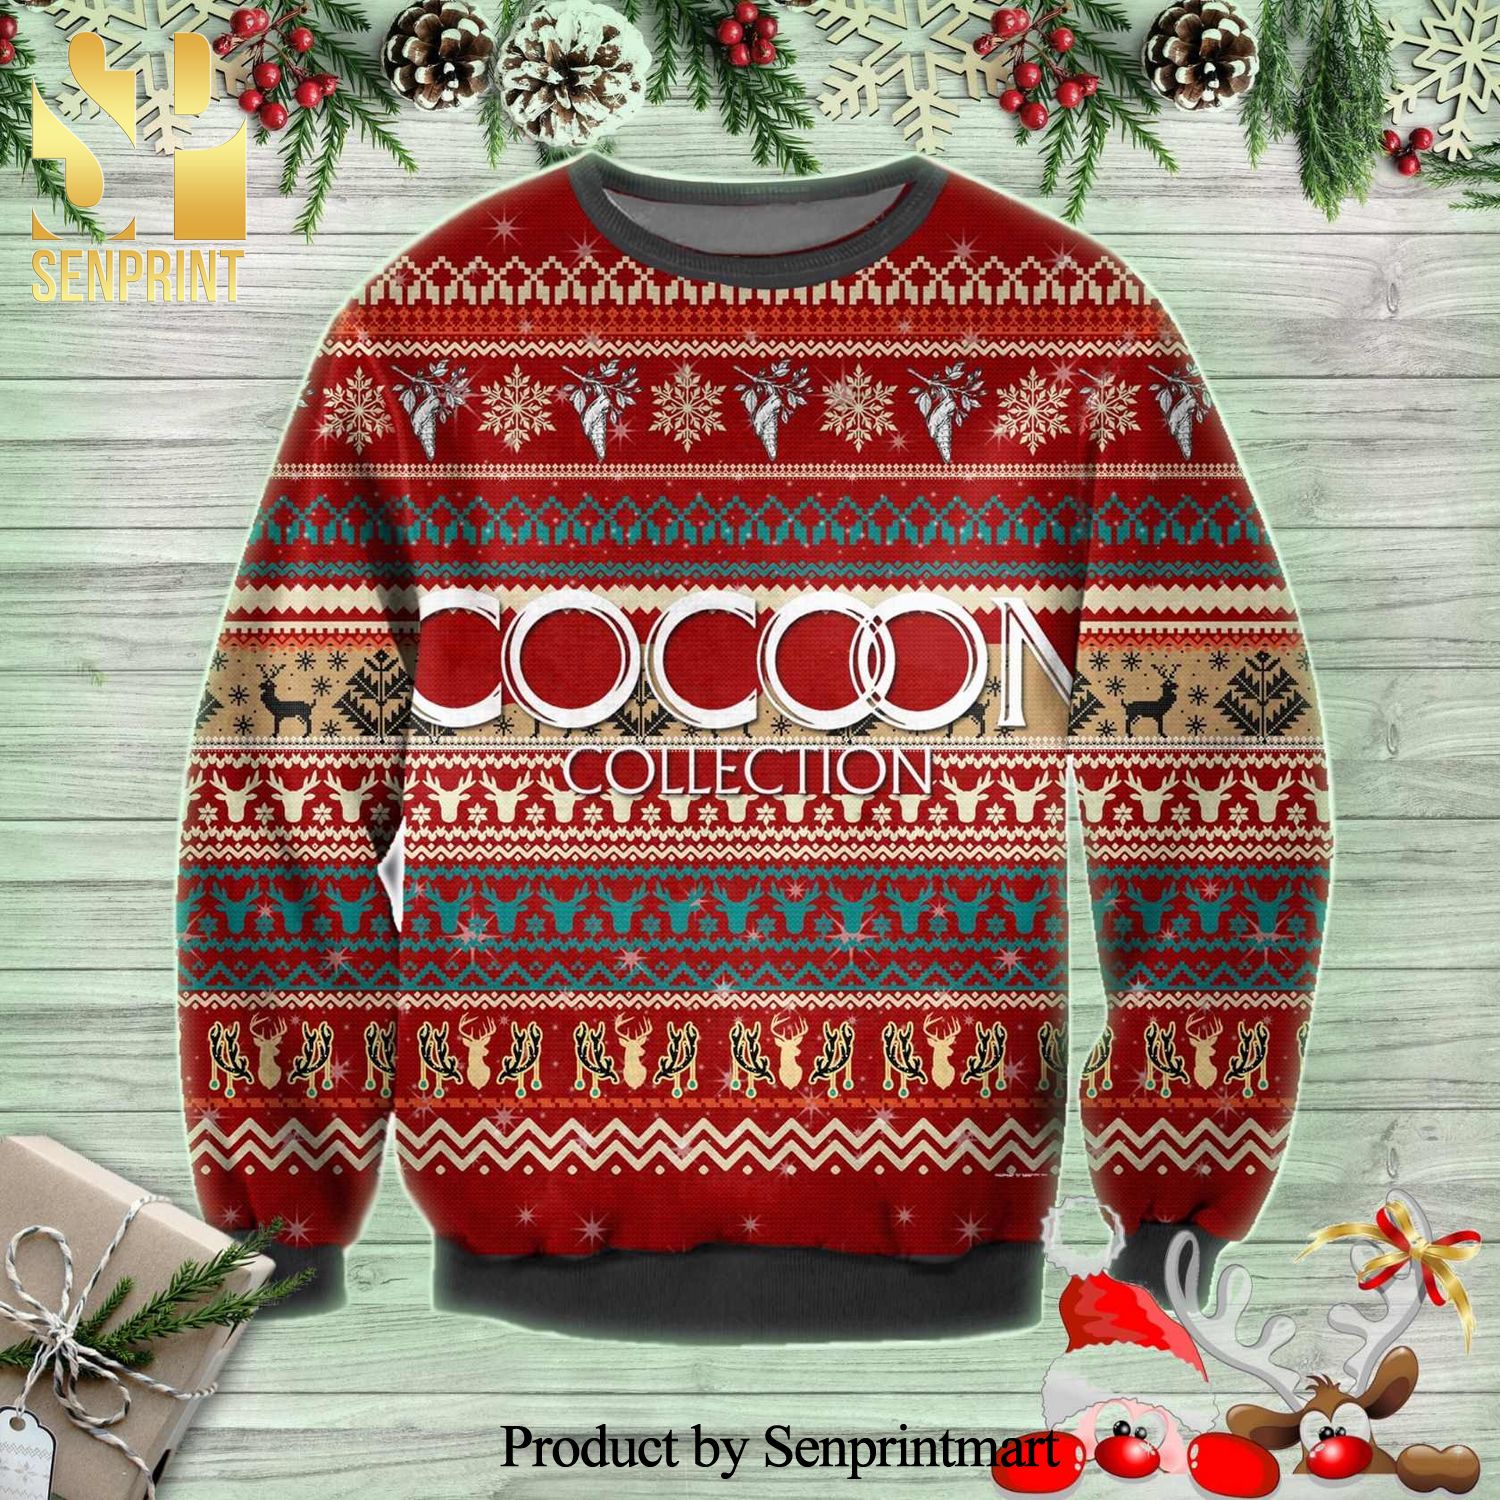 Cocoon Collection Knitted Ugly Christmas Sweater